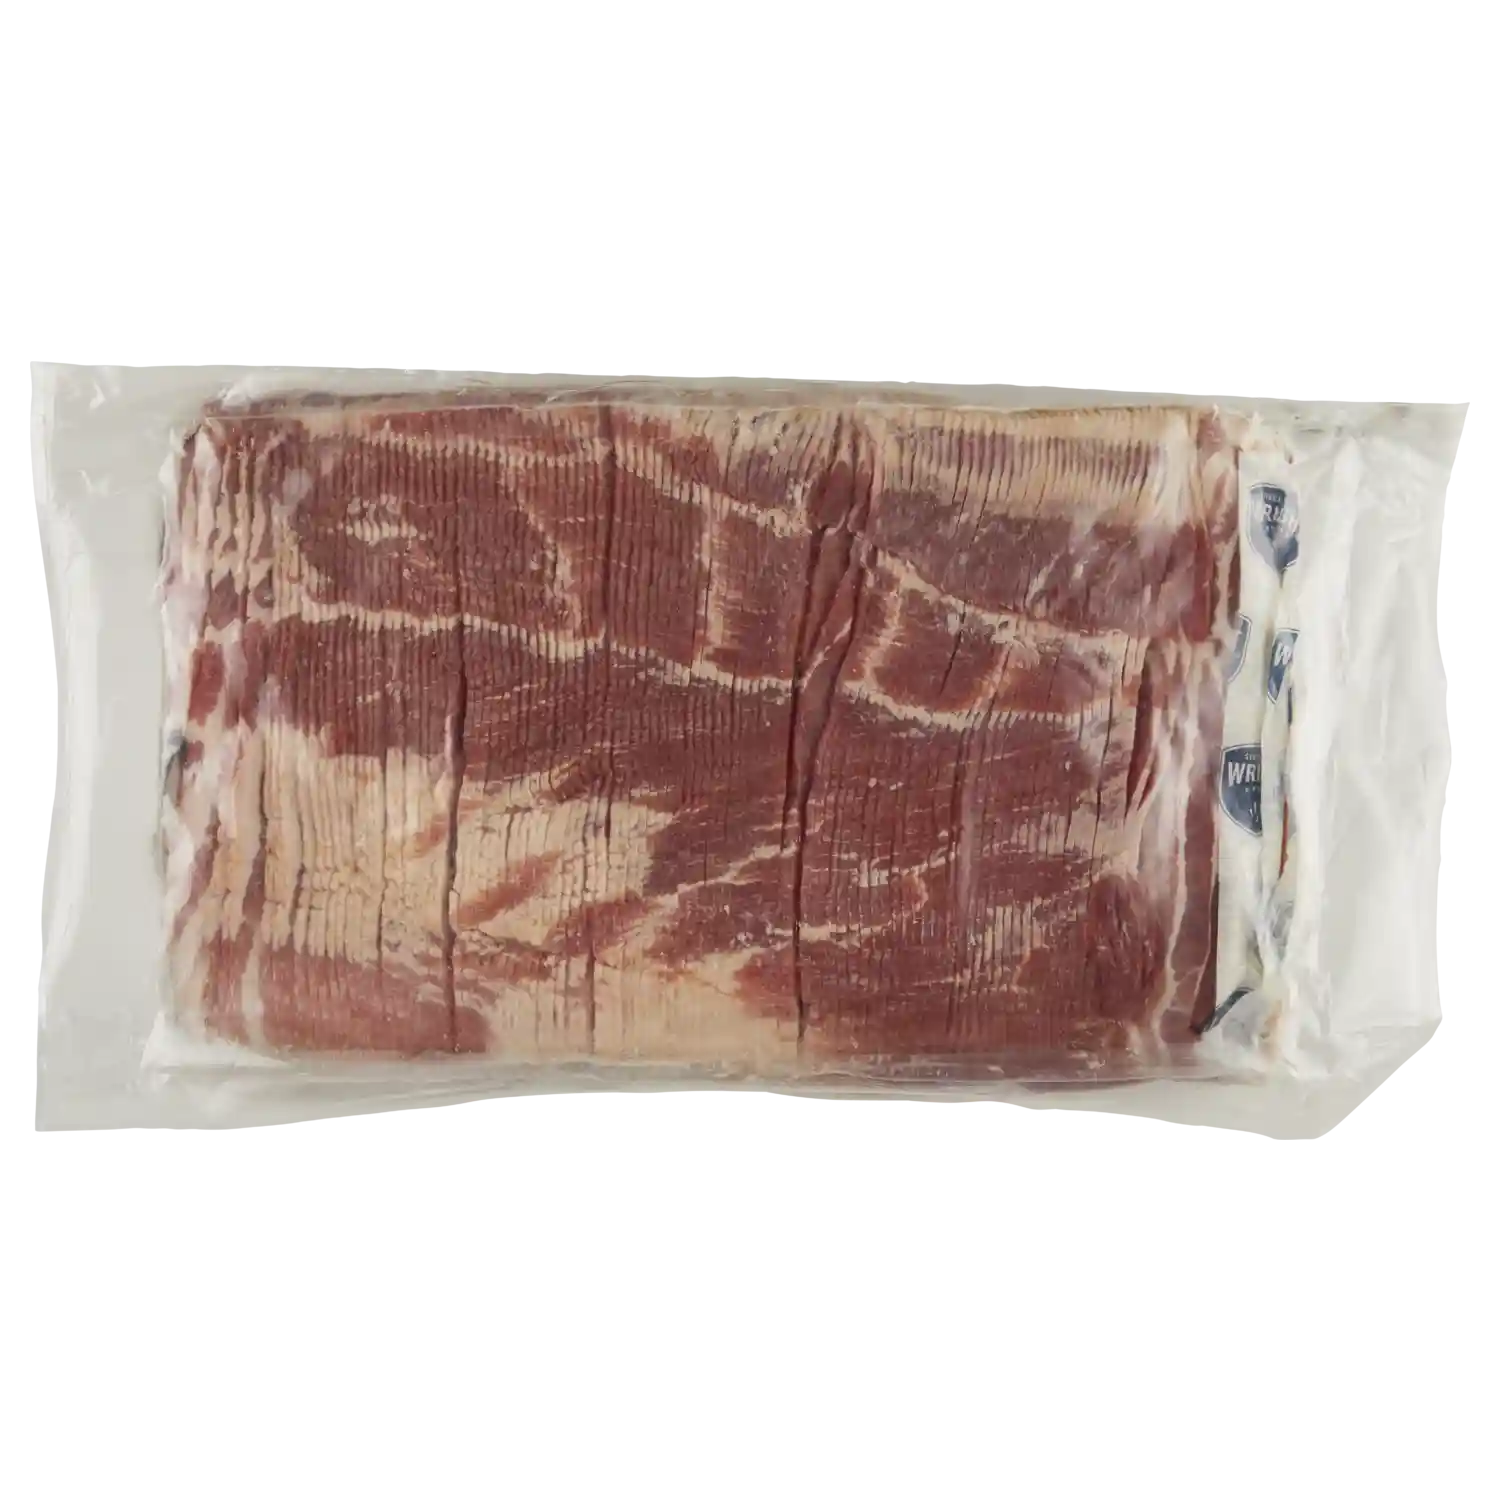 Wright® Brand Naturally Applewood Smoked Thick Sliced Bacon, Bulk, 15 Lbs, 10-14 Slices per Pound, Gas Flushed_image_31